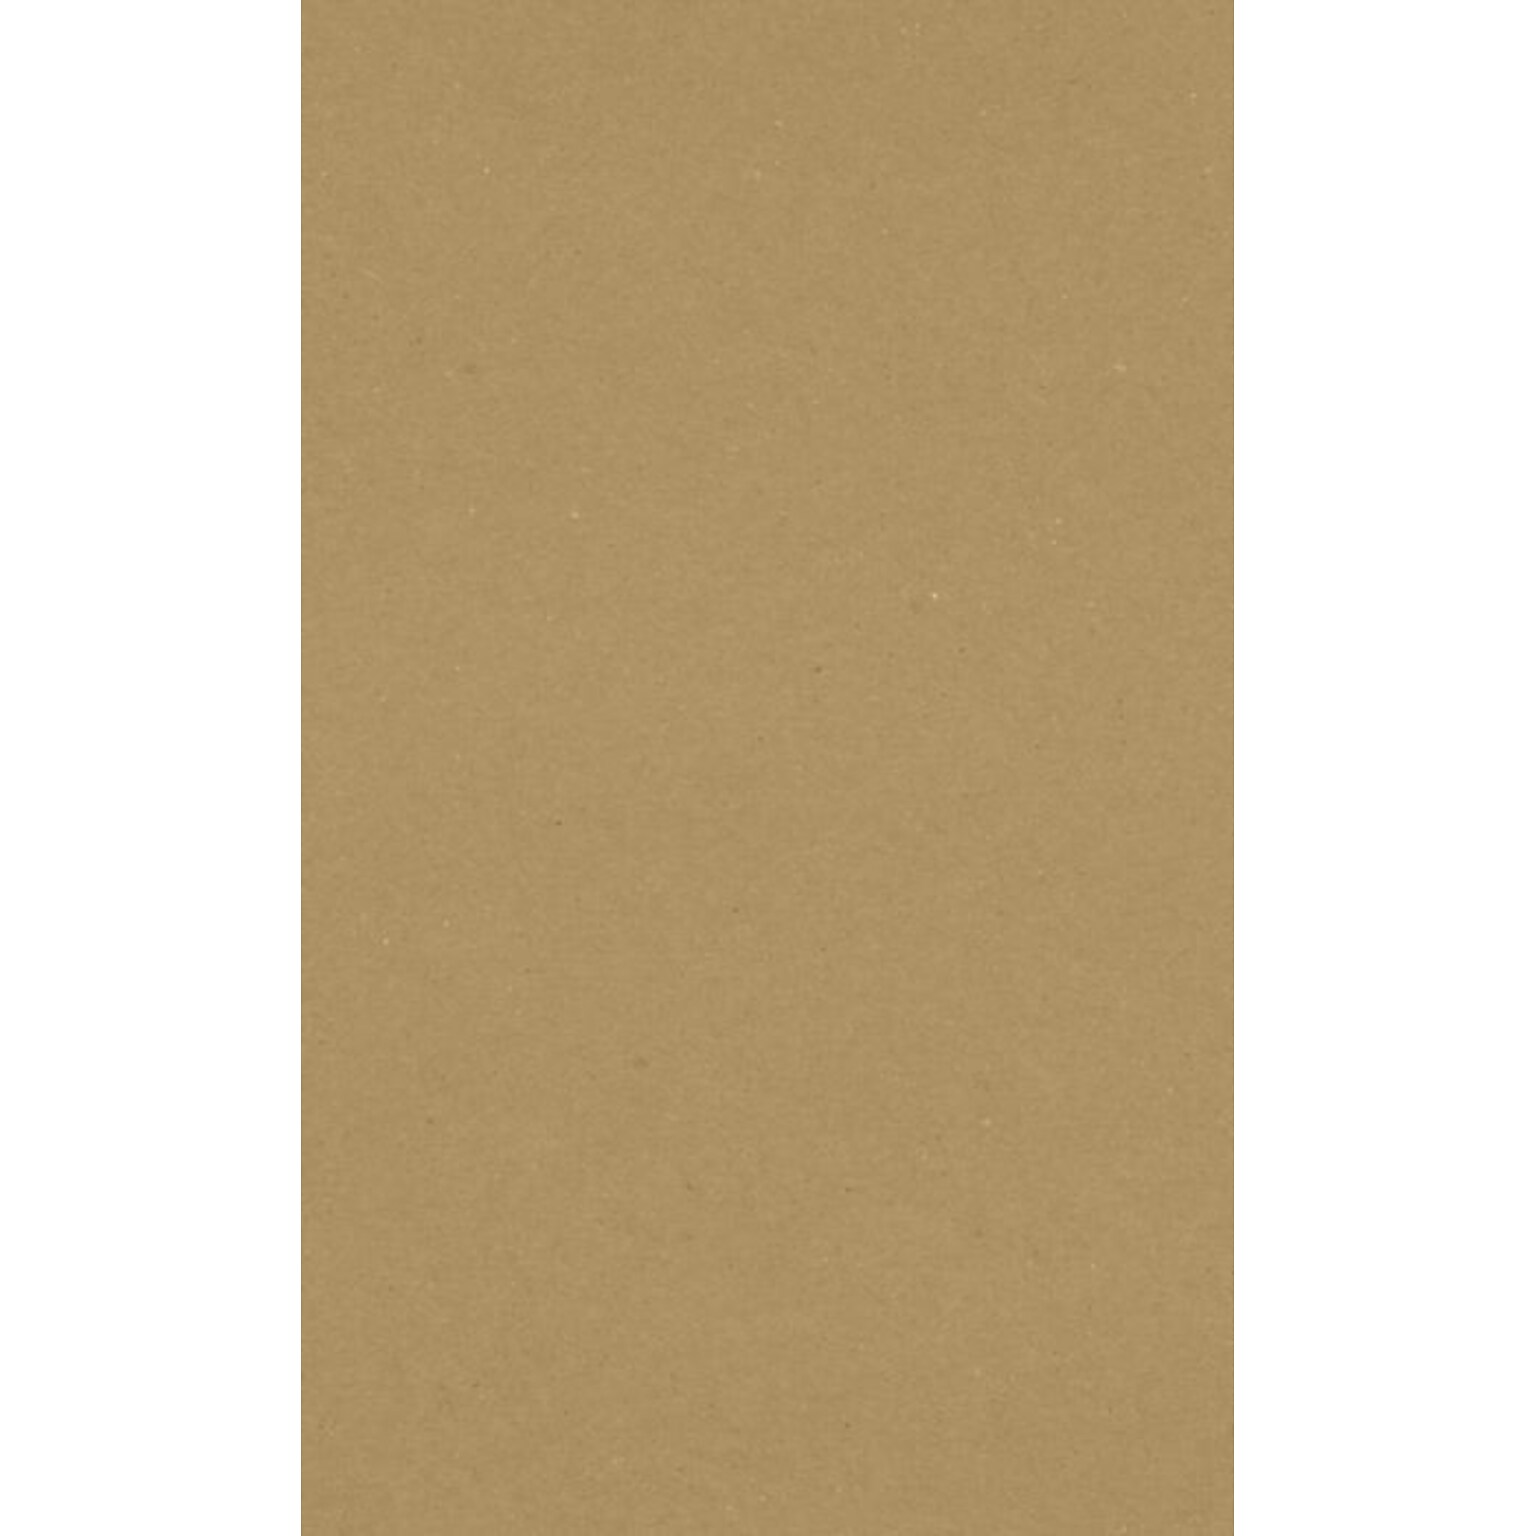 LUX 70 lb. Paper, 8.5 x 14, Grocery Bag Brown, 500 Sheets/Pack (81214-P-GB-500)